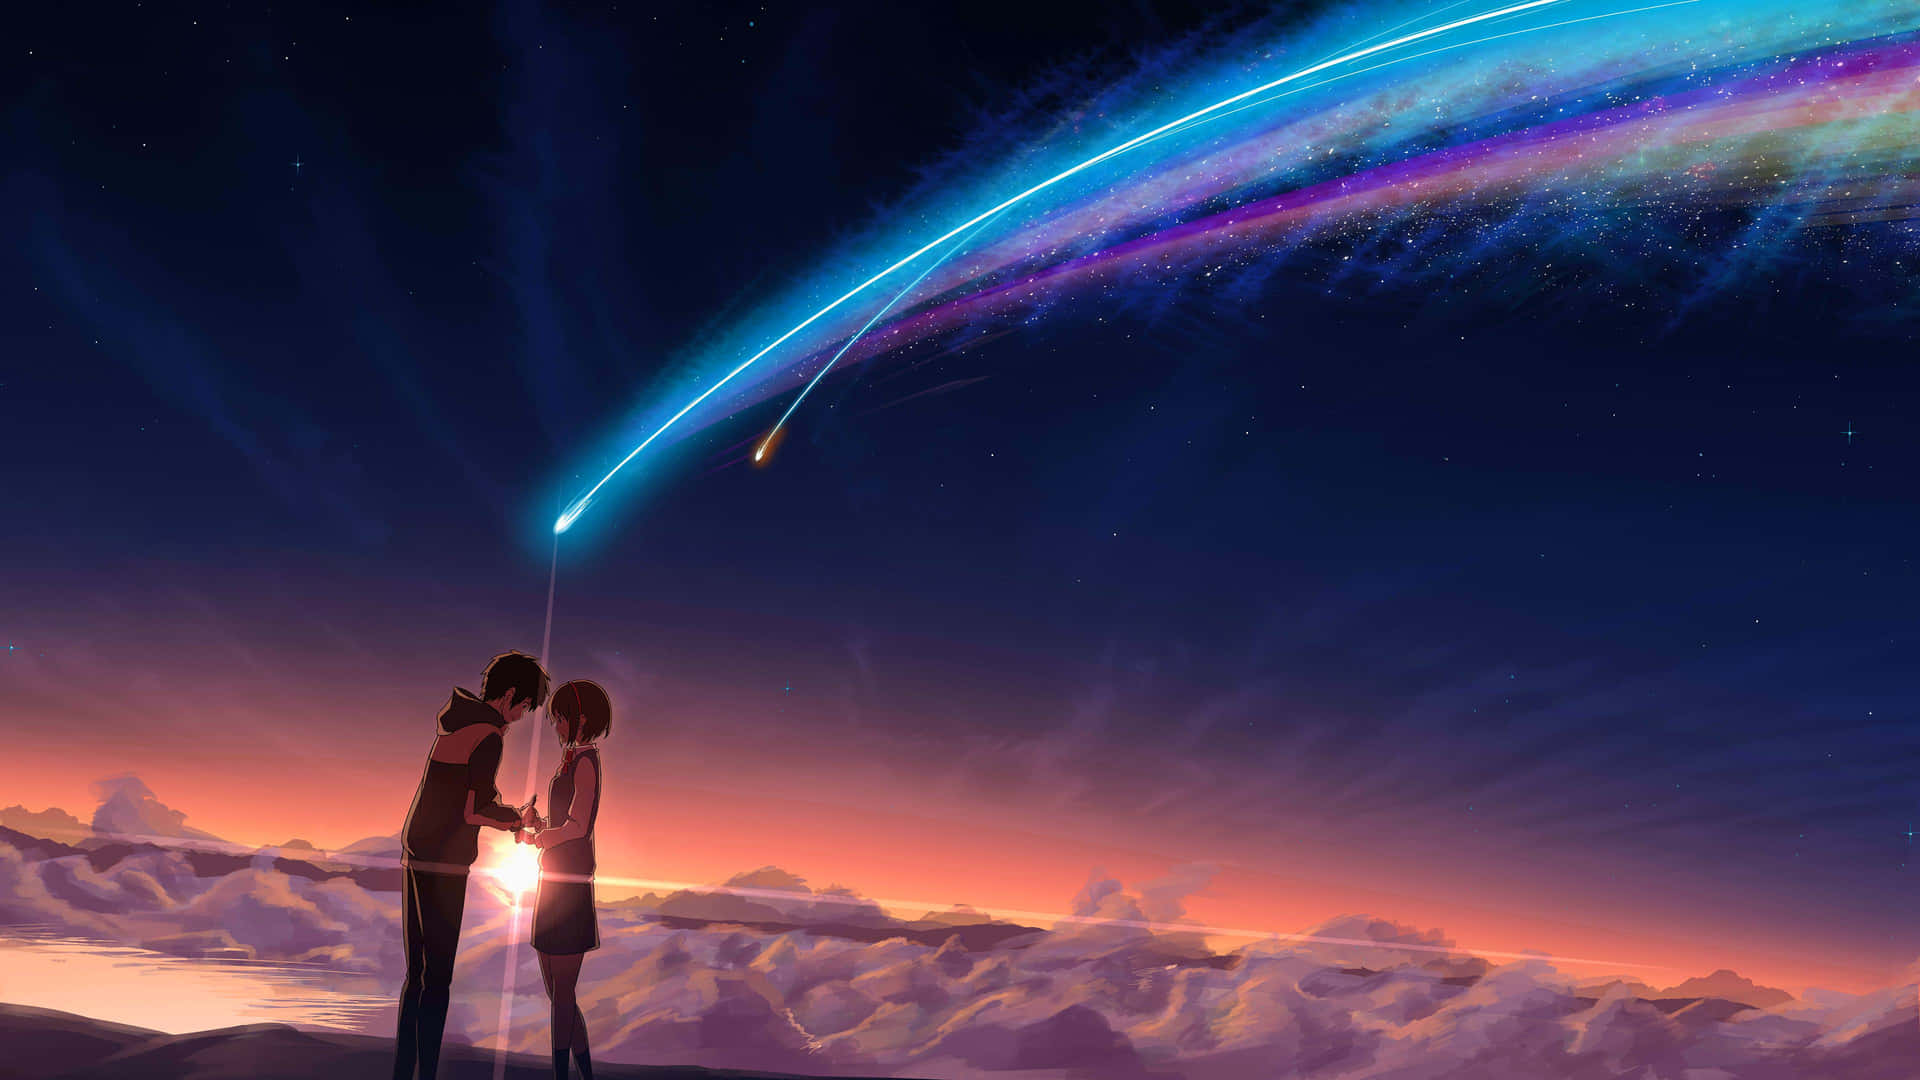 Three souls interconnected in a profound story of Kimi No Na Wa